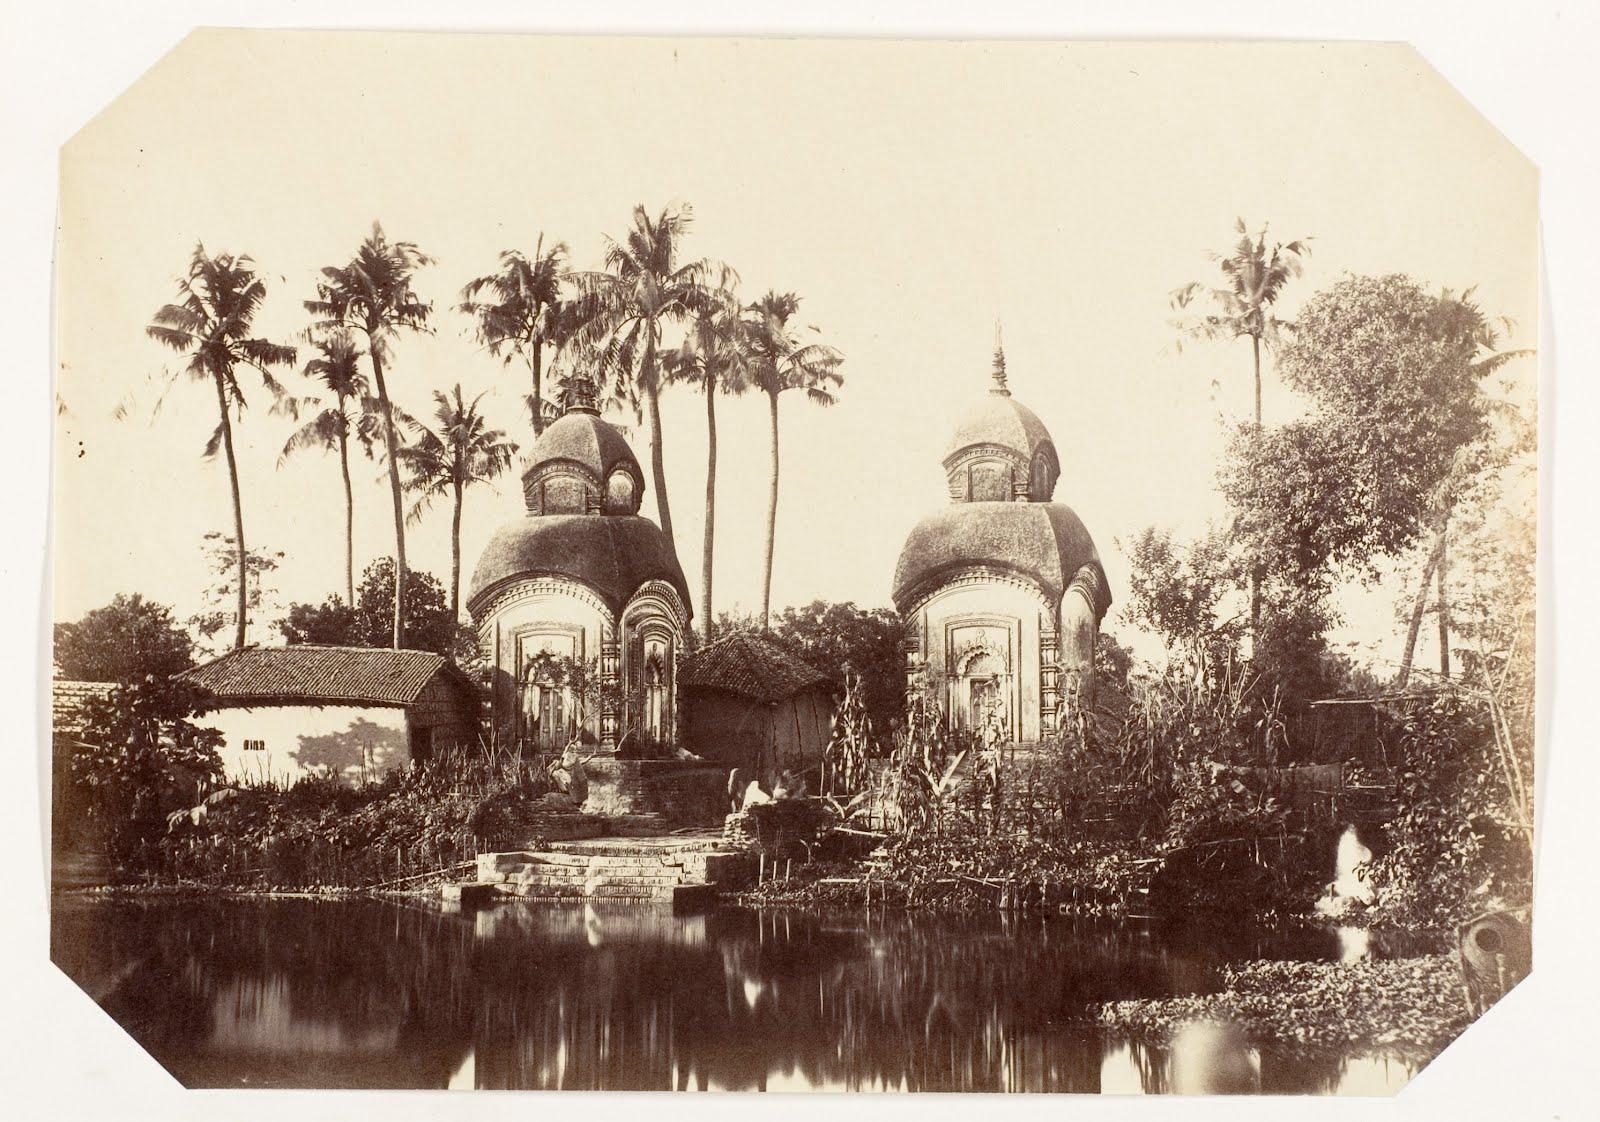 Vintage Photograph of Temples in the Suburbs of Calcutta Kolkata